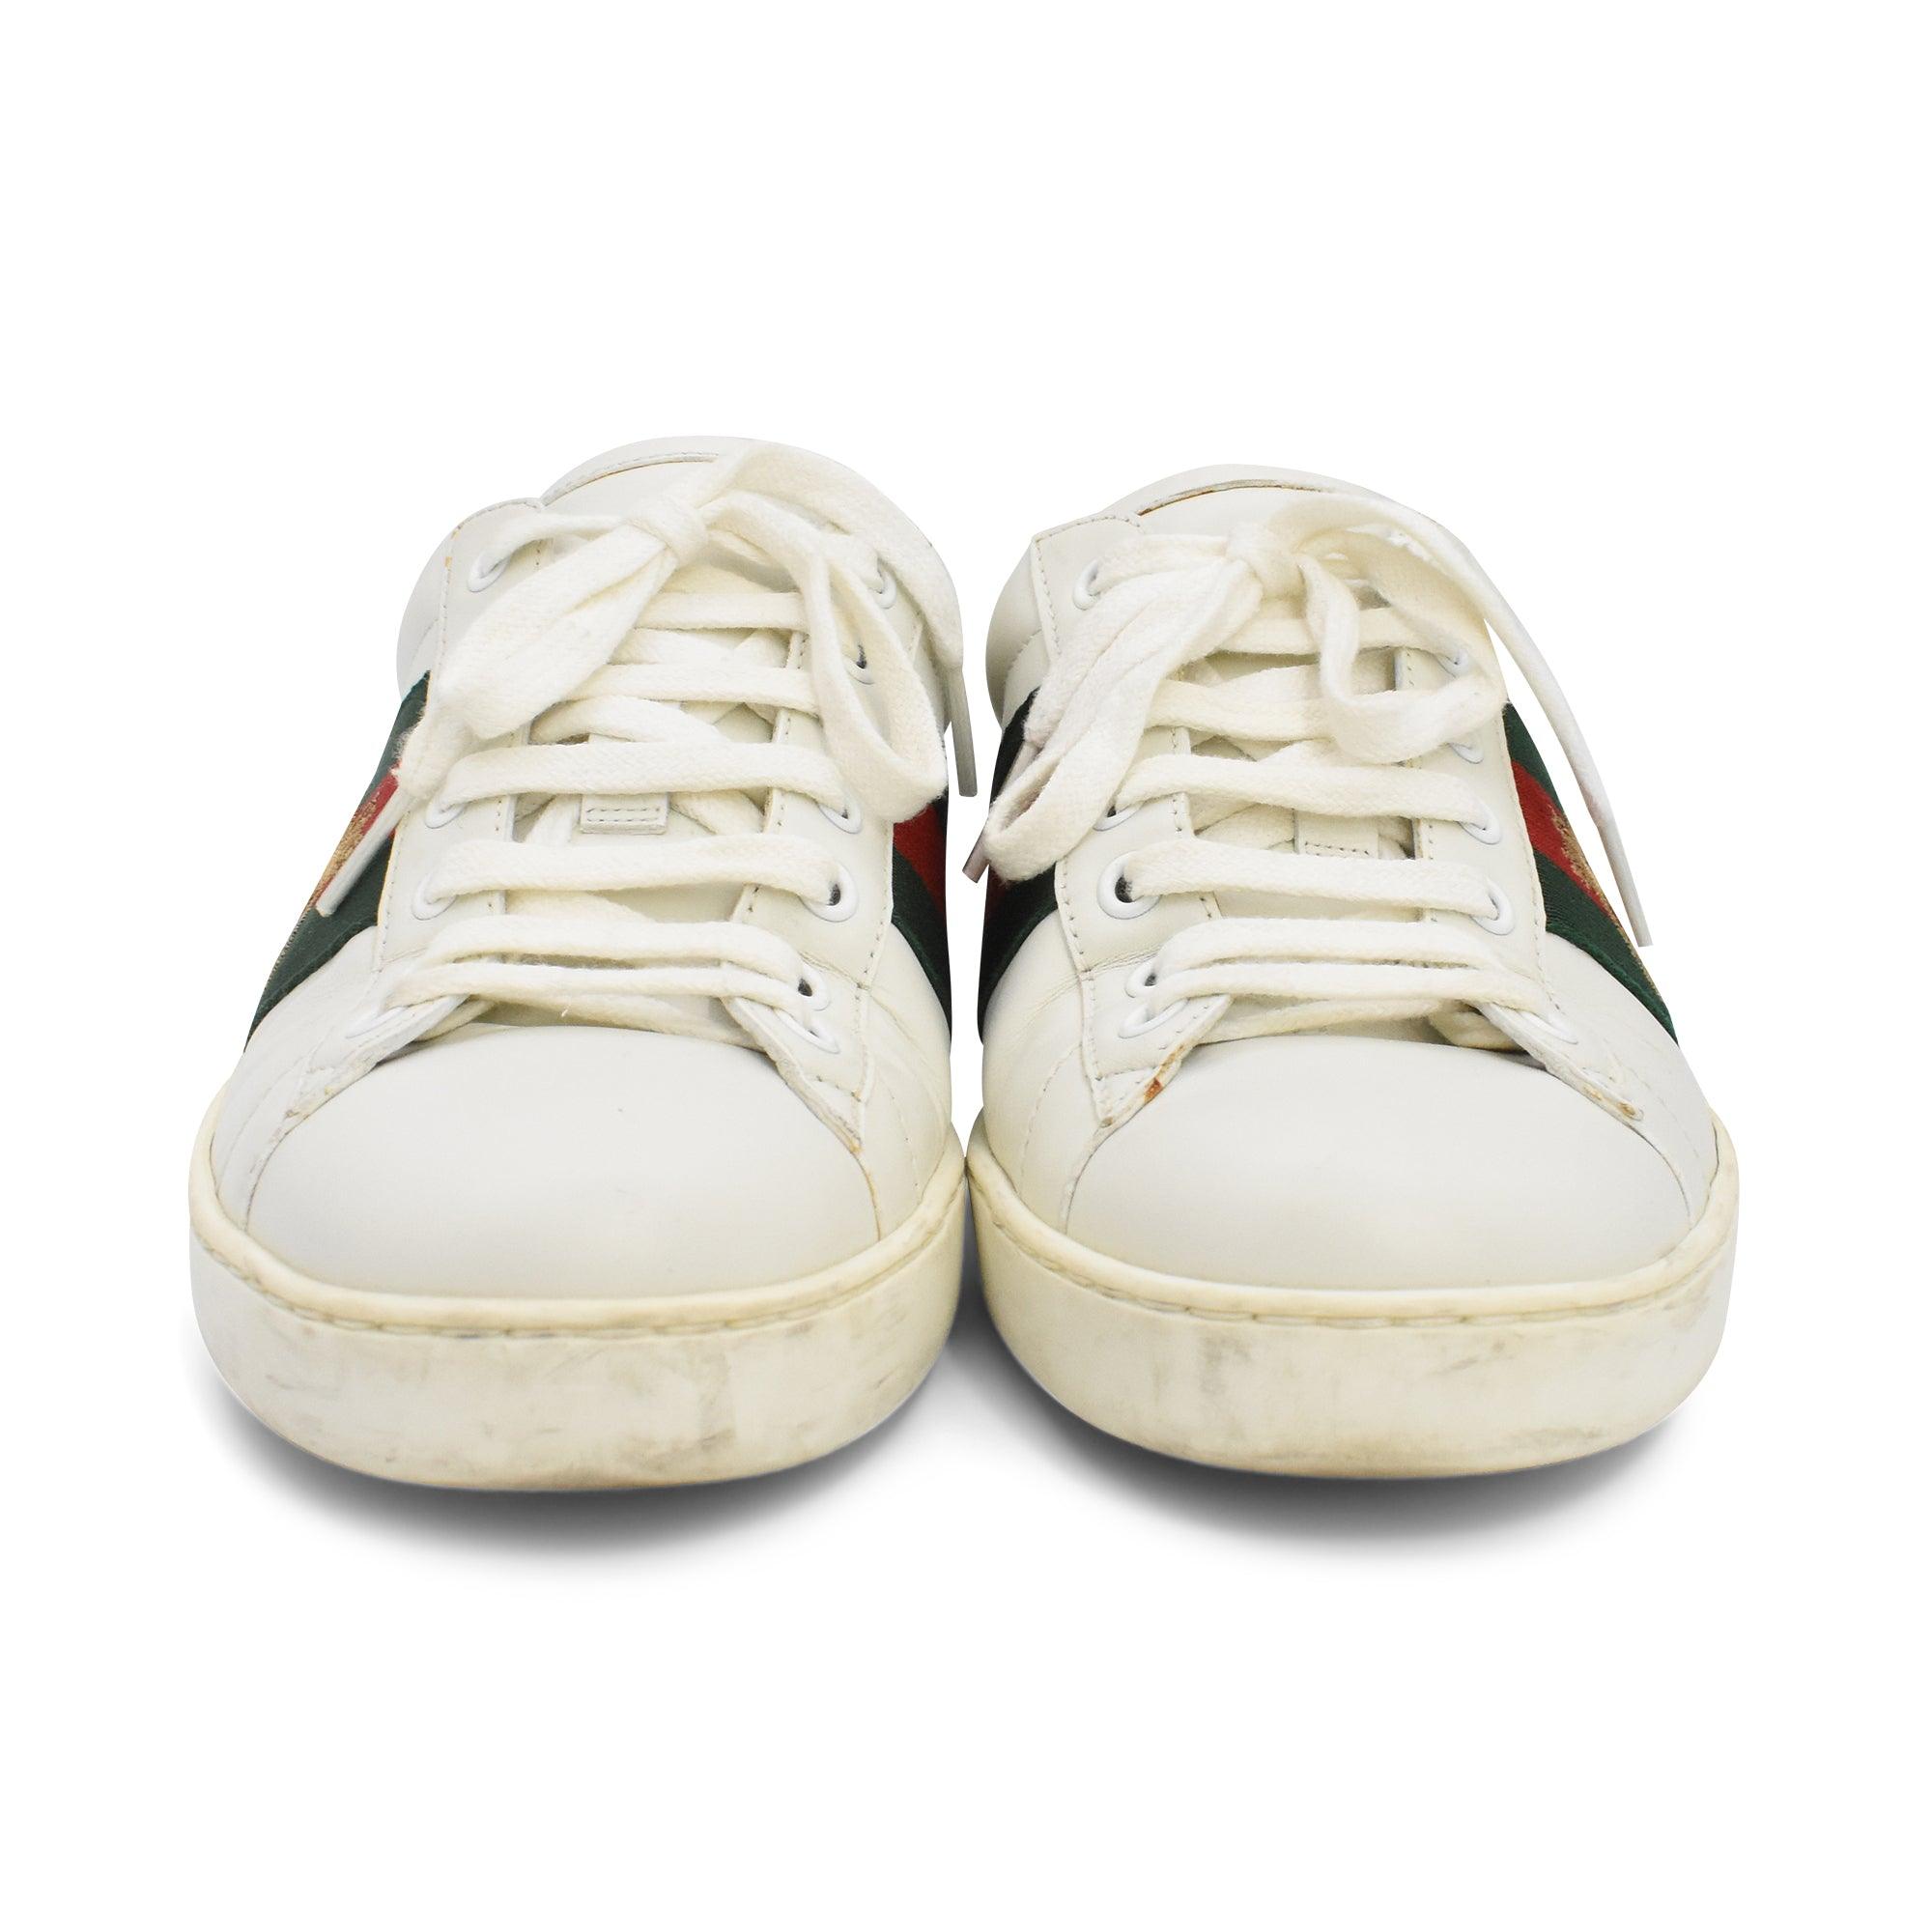 Gucci 'Ace' Sneakers - Men's 6 - Fashionably Yours